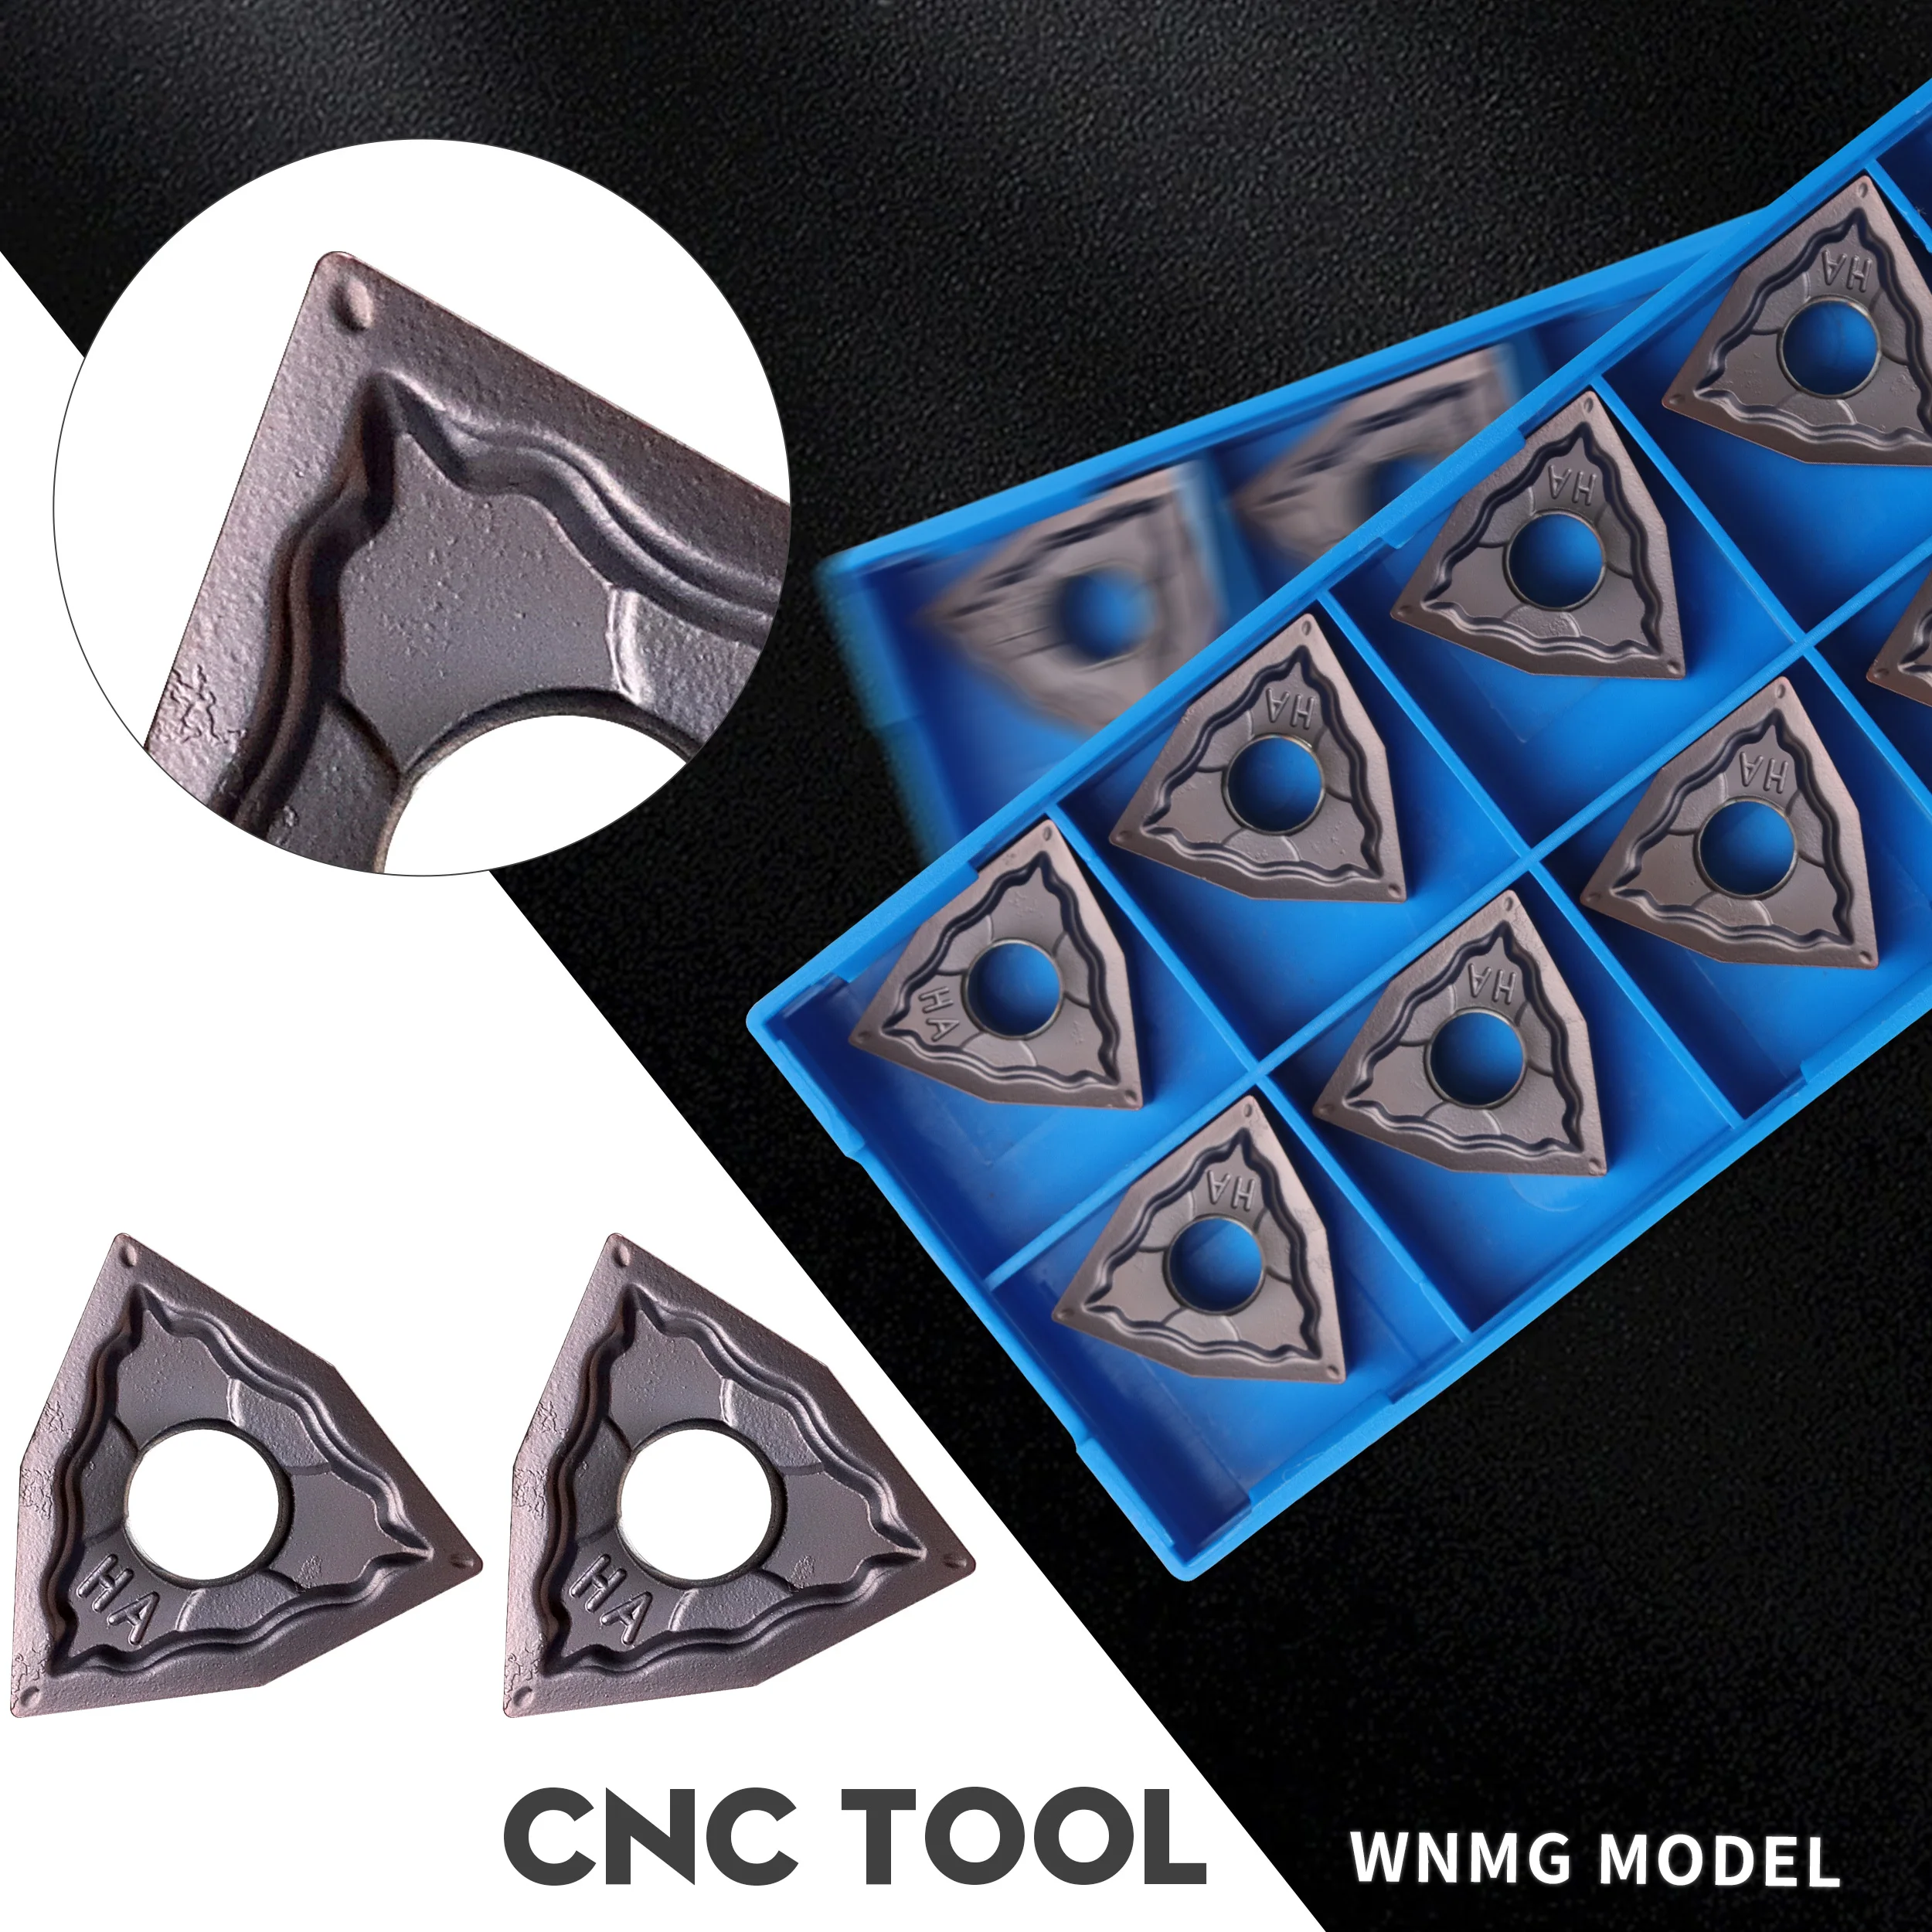 WNMG080404HA PC9030 WNMG080408HA PC9030 Carbide Inserts CNC Lathe Tool External Turning Tool Turning Blade , For Stainless Steel